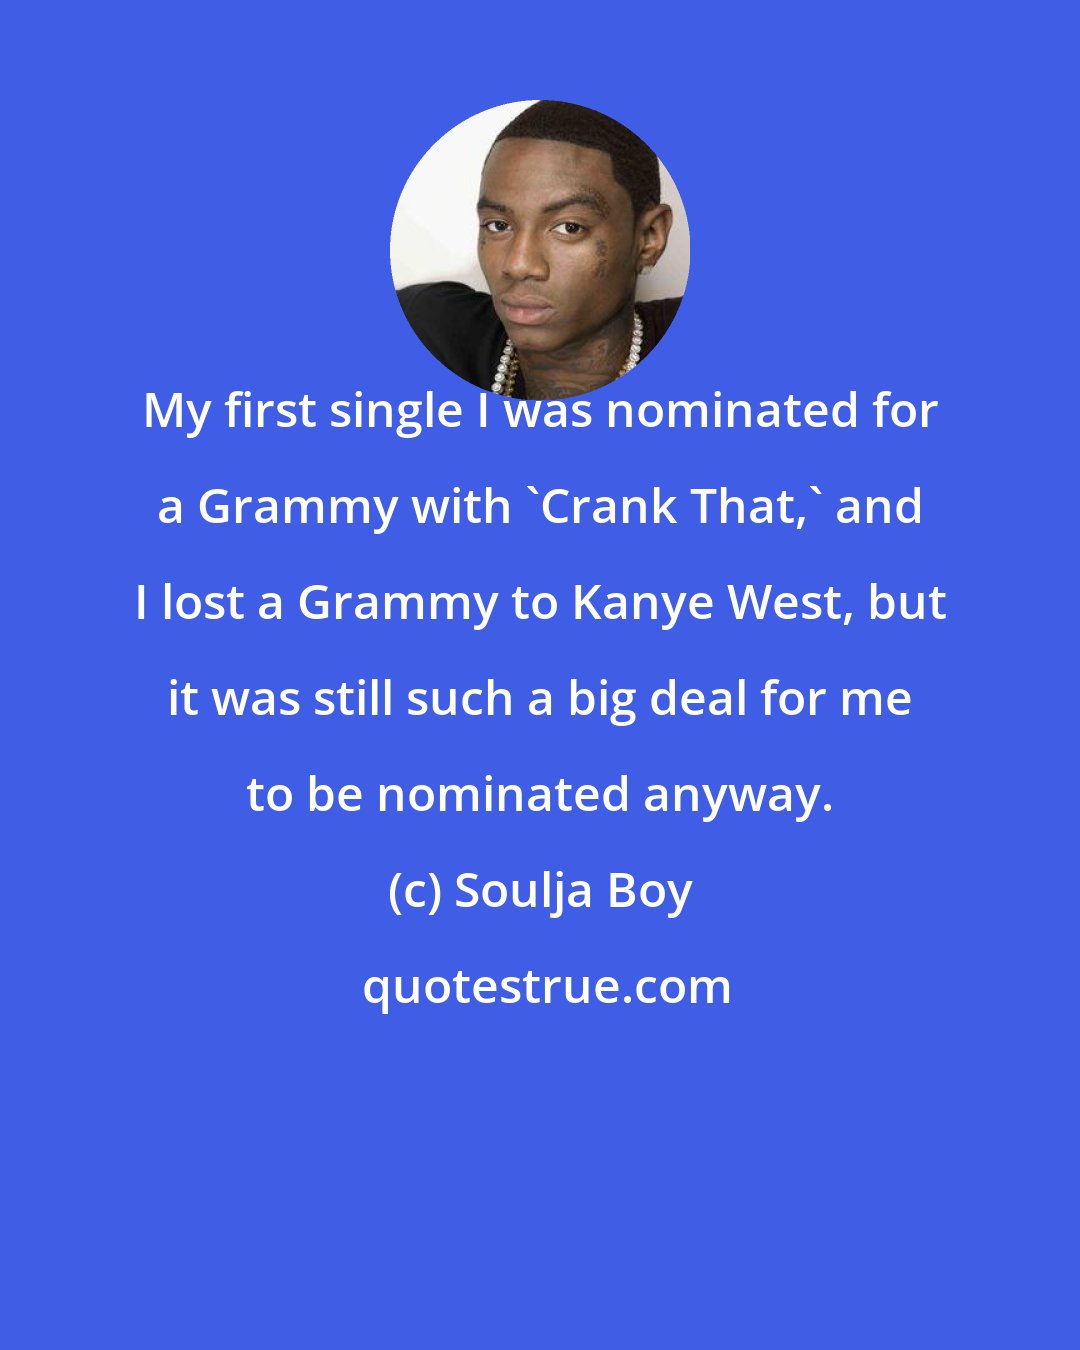 Soulja Boy: My first single I was nominated for a Grammy with 'Crank That,' and I lost a Grammy to Kanye West, but it was still such a big deal for me to be nominated anyway.